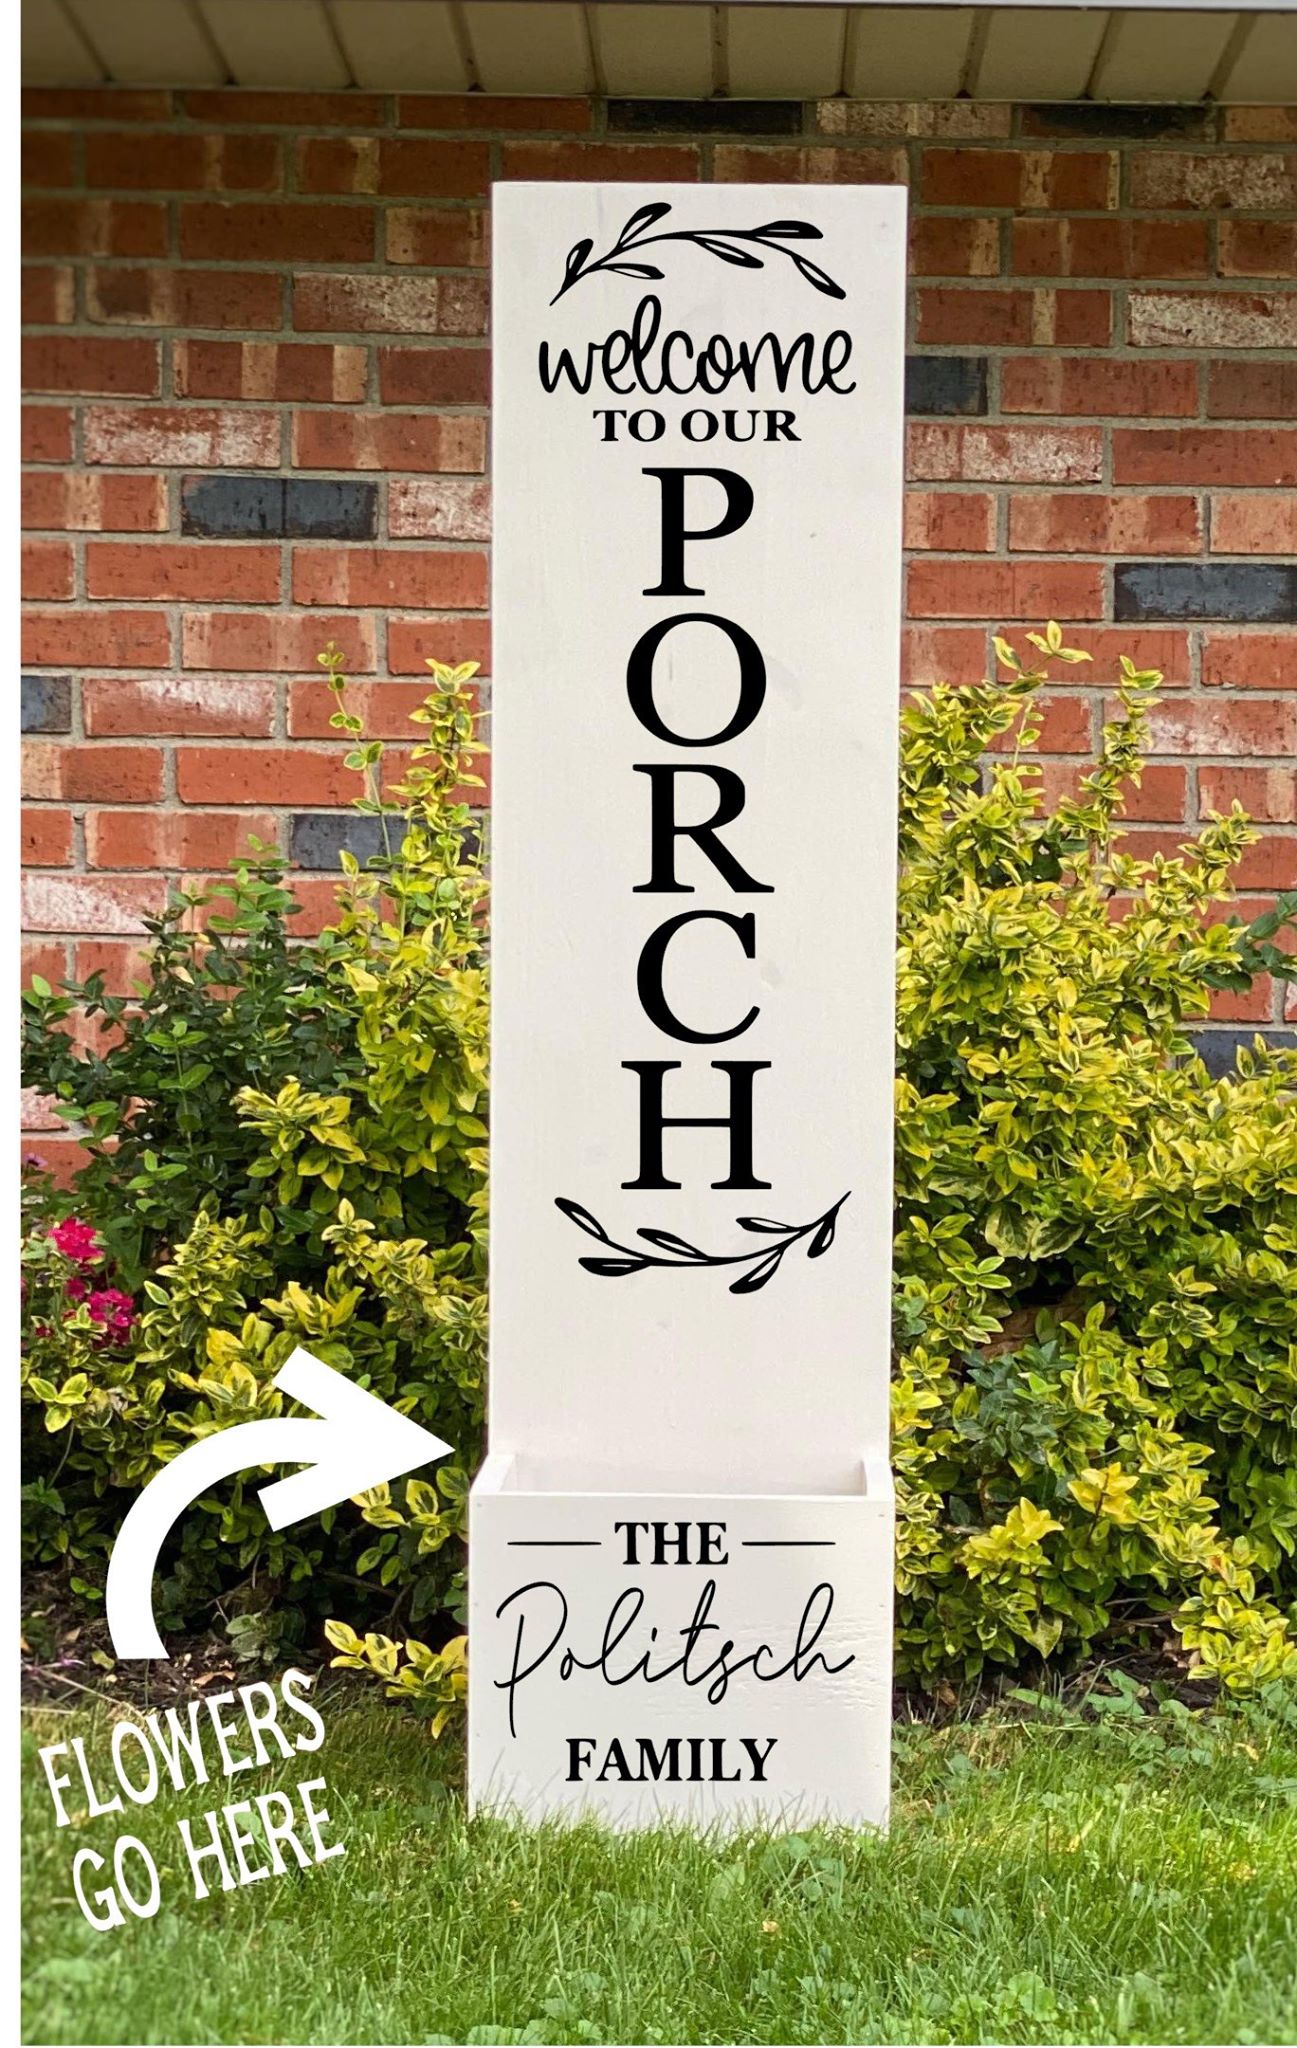 Porch Planter - Welcome to our porch with family name